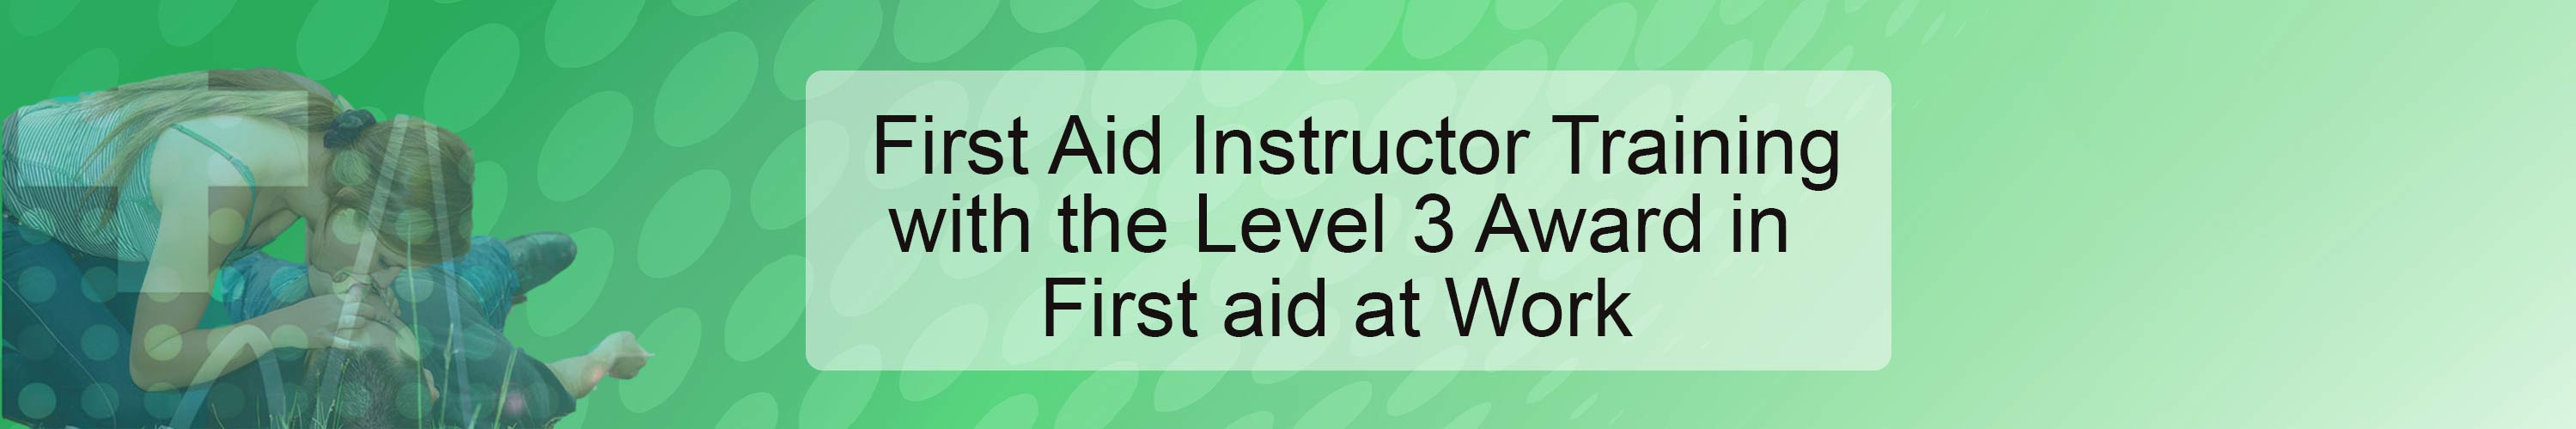 become a first aid at work instructor banner